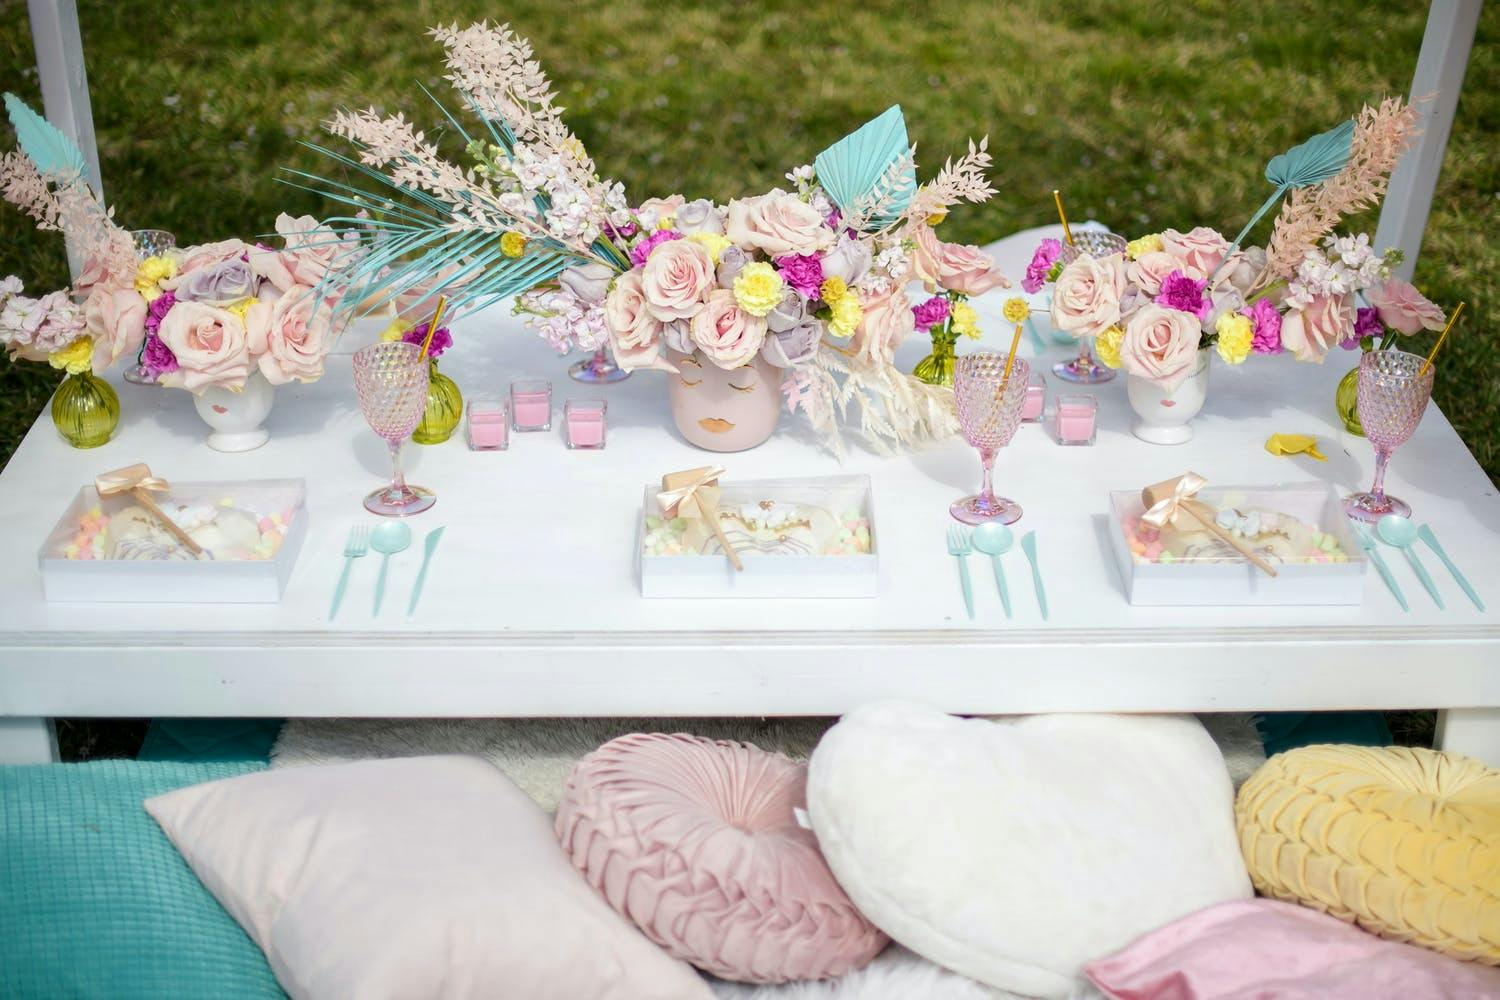 Outdoor kid's birthday party with low tables, pillow seats, and pastel-dyed floral centerpieces | PartySlate